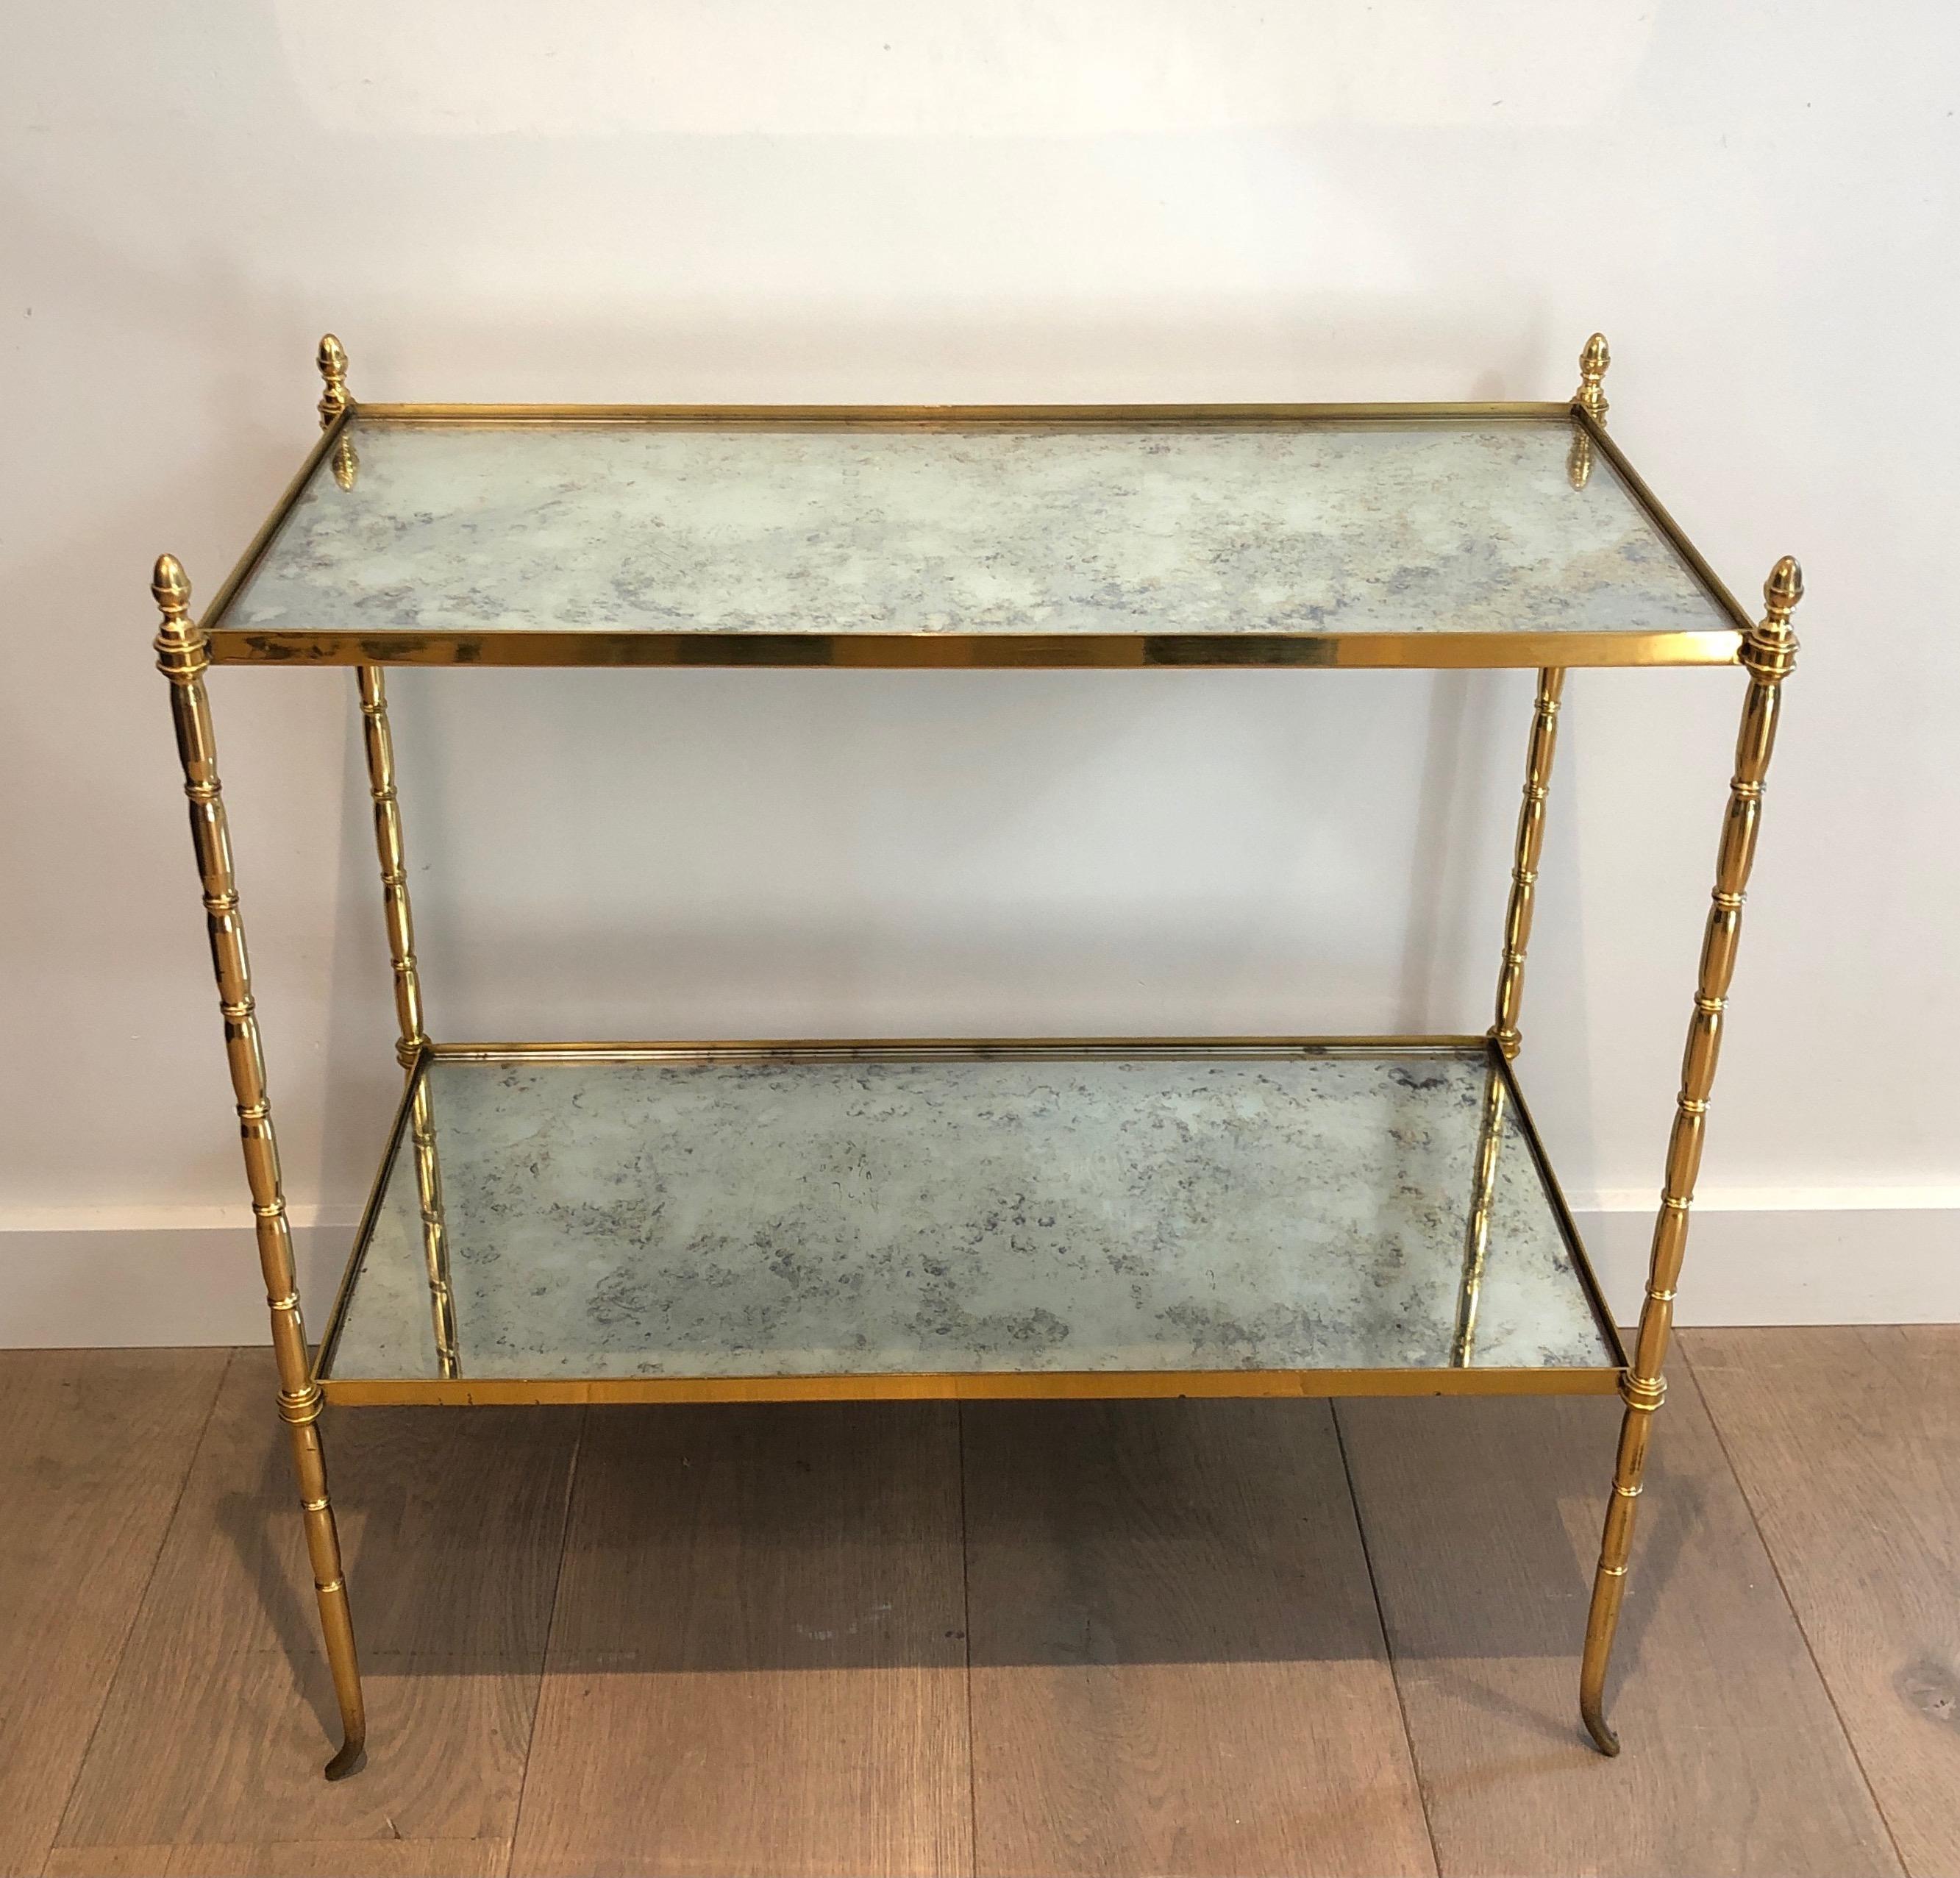 Faux-bamboo brass side table with eglomised glass shelves. French work by Maison Bagués. Circa 1940.